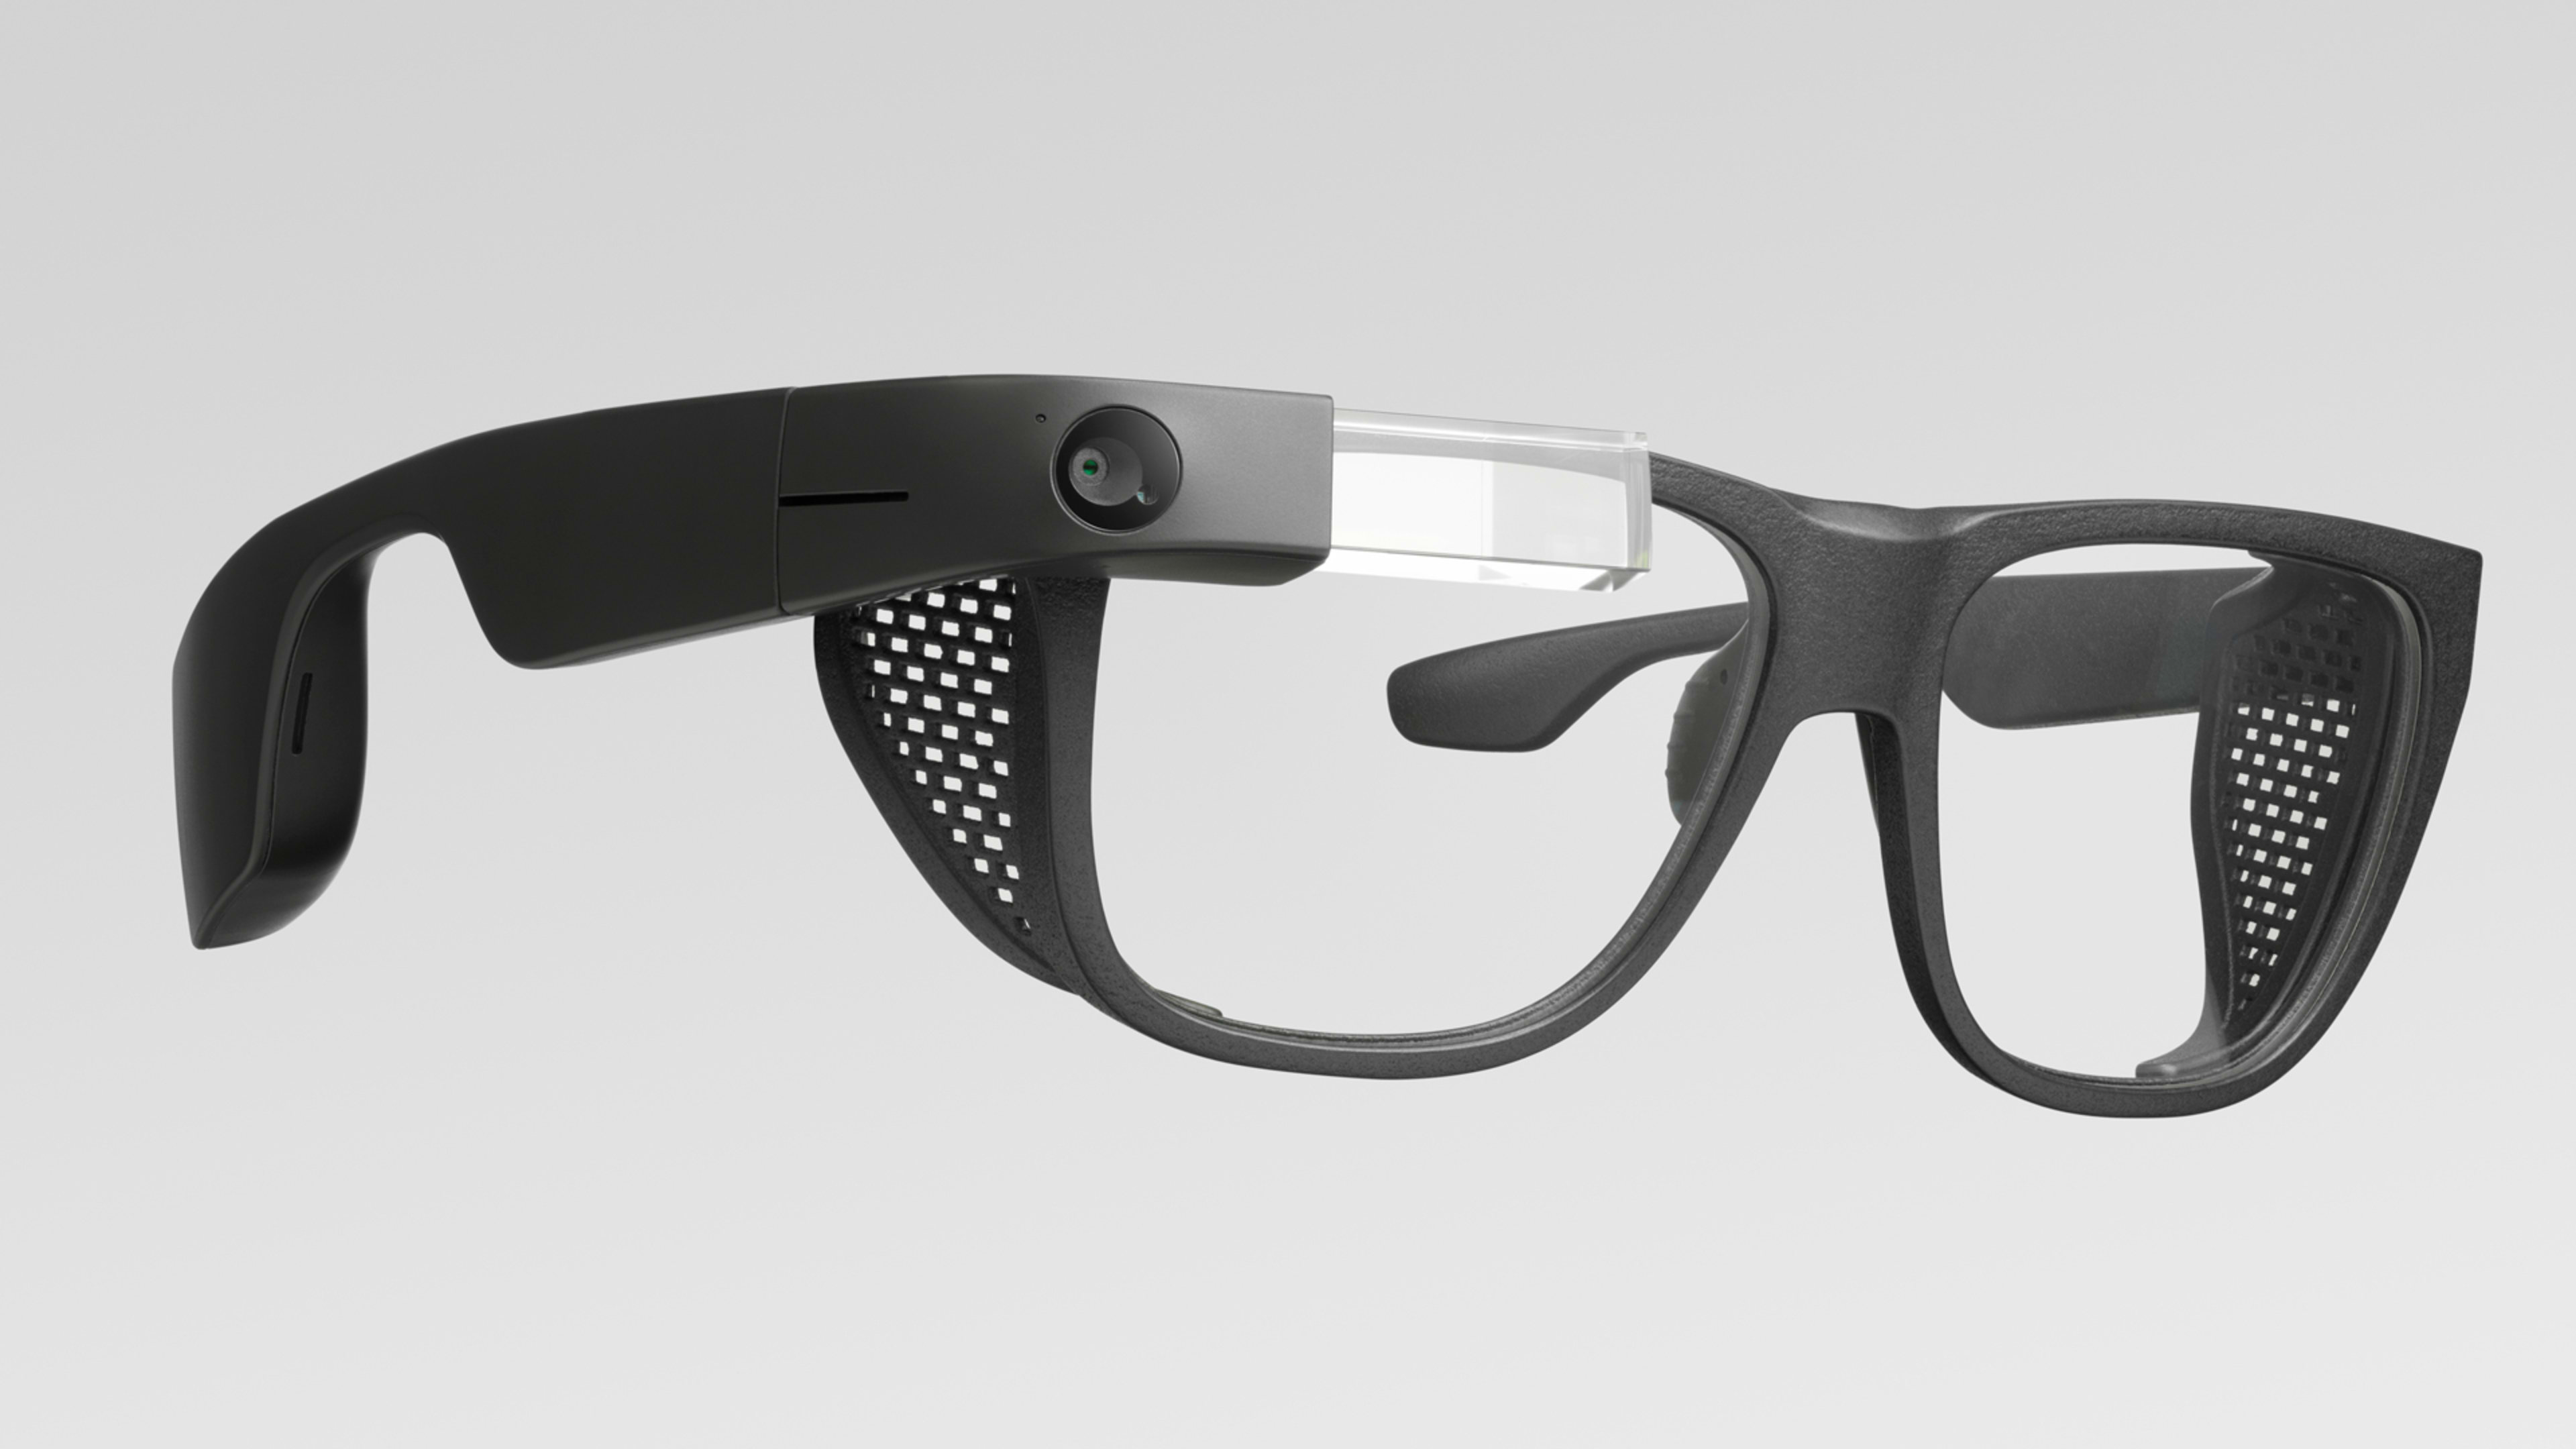 Google says the new Google Glass gives workers ‘superpowers’